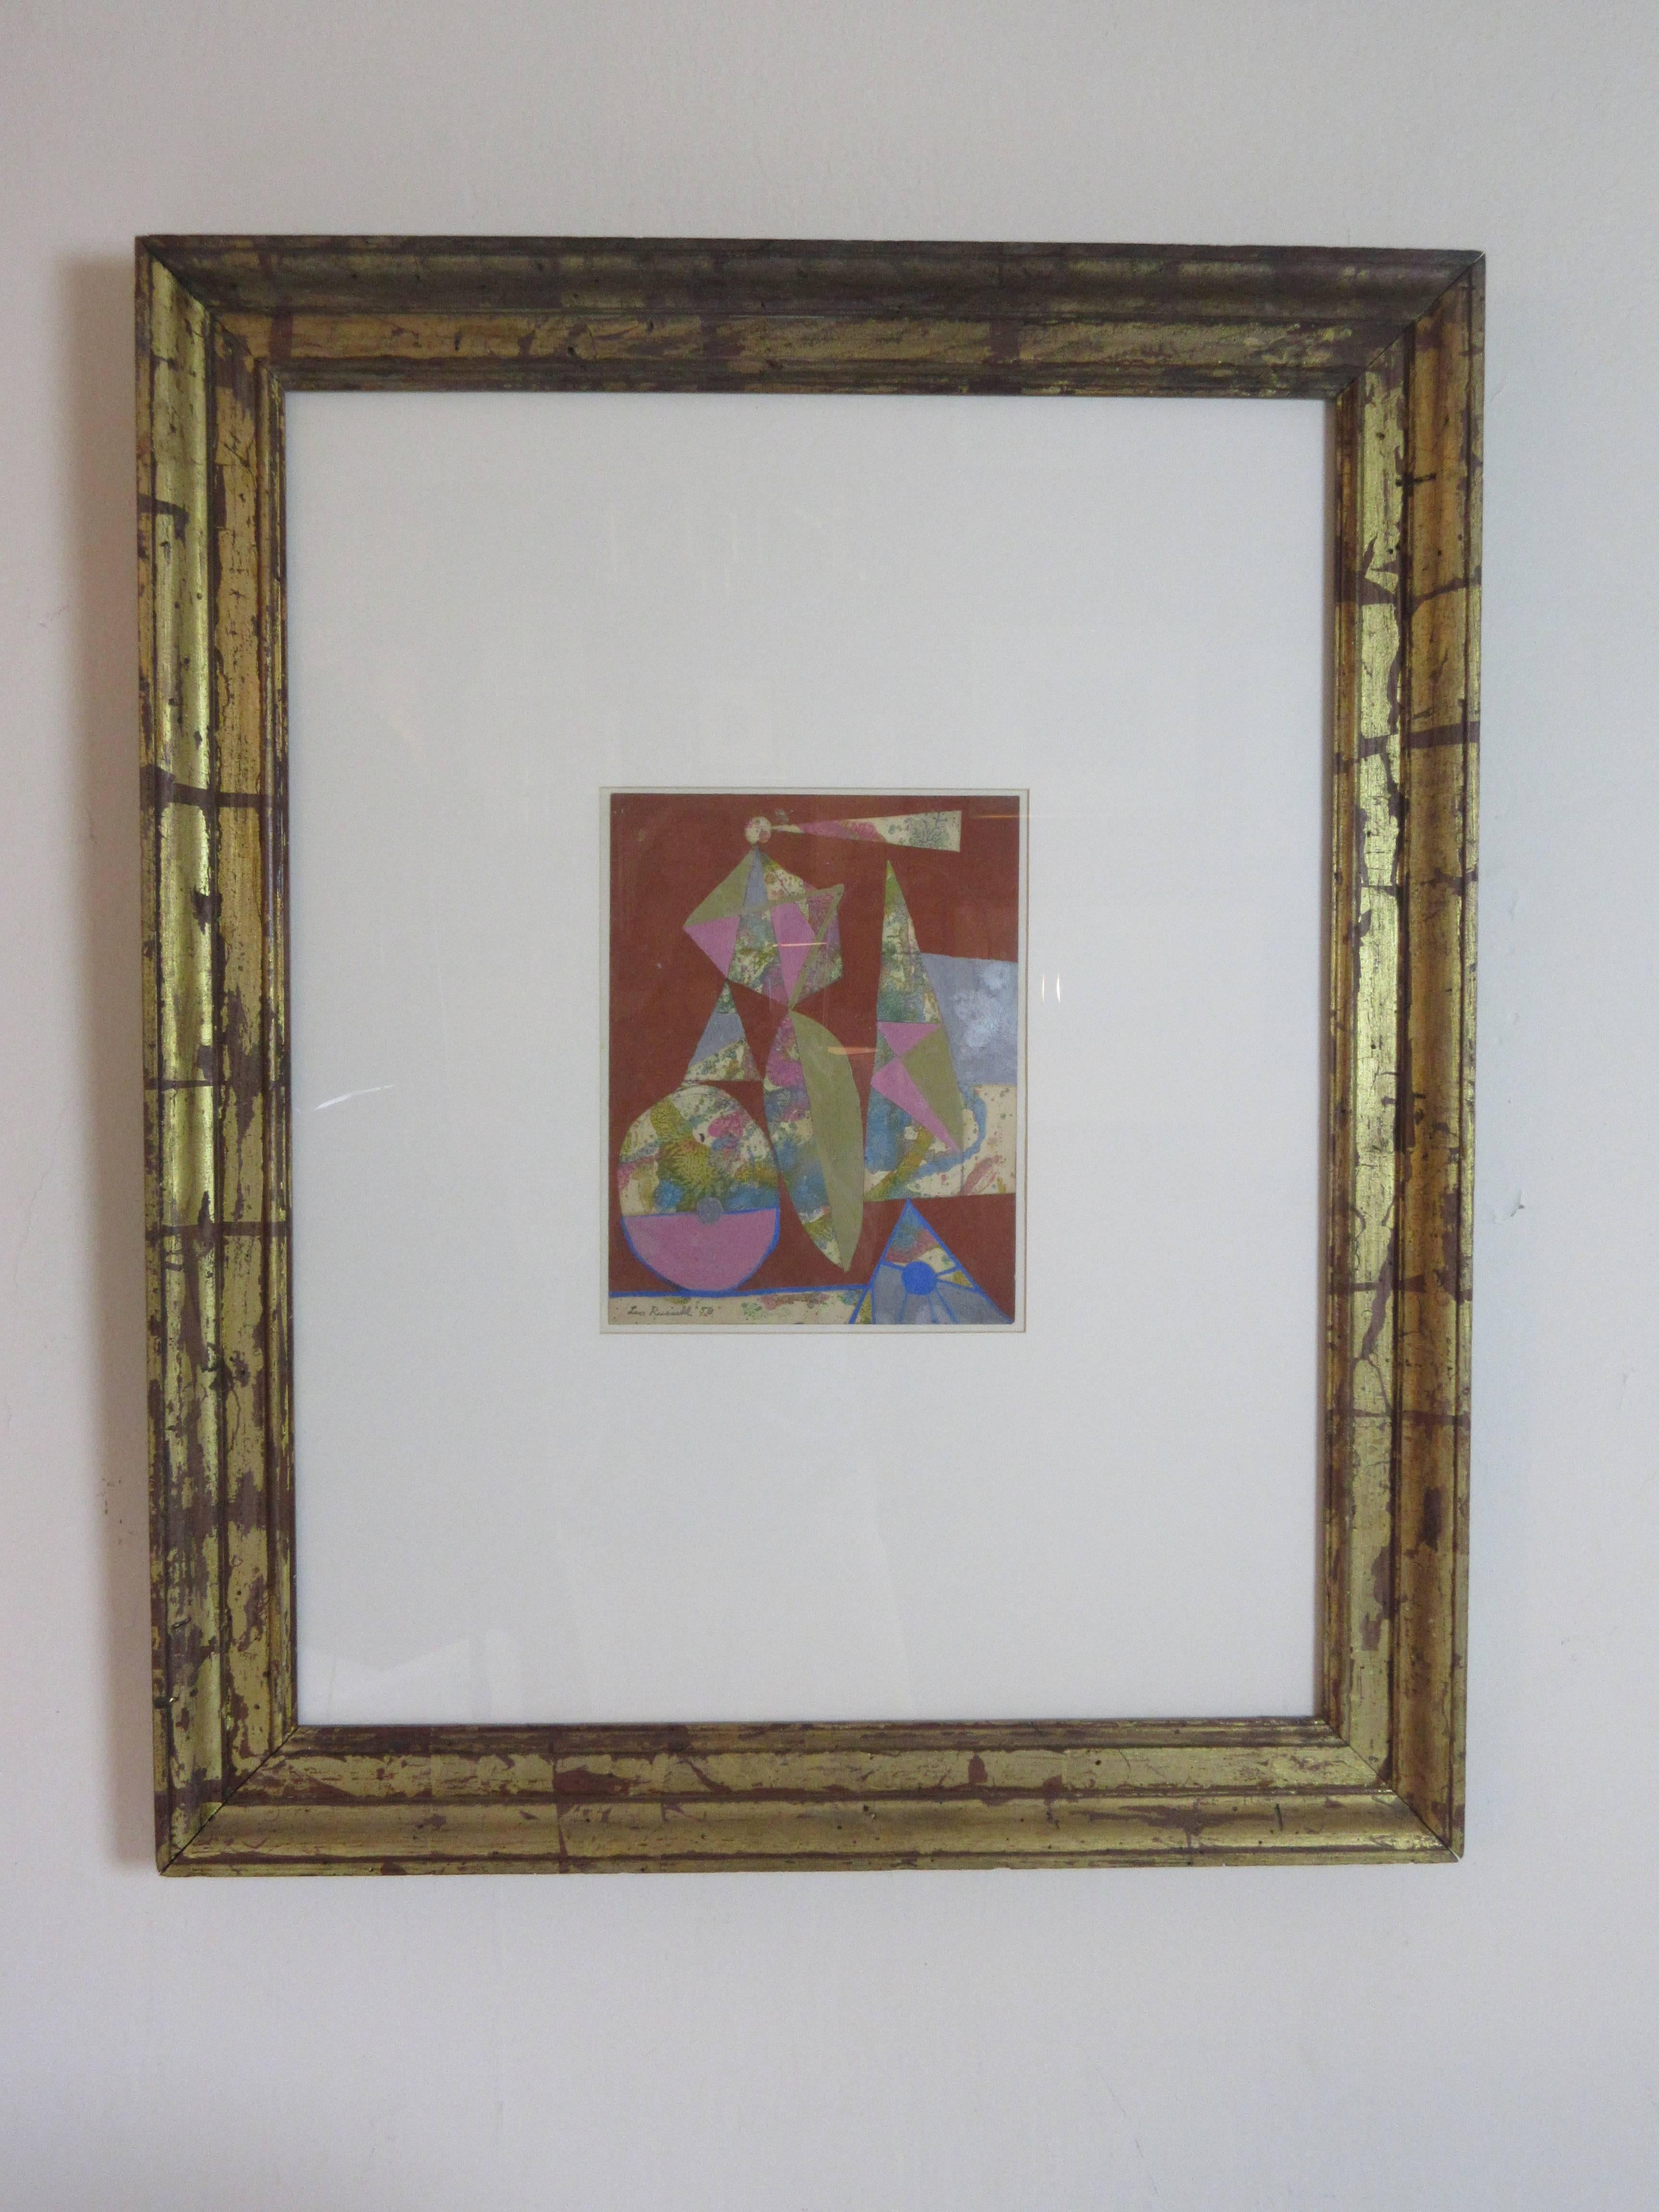 Leo Russel Gouache 1956. Organic abstract shapes on paper framed in distressed gold leaf and under glass. Image is 8.5 x 11. Frame is 26.5 x 33.